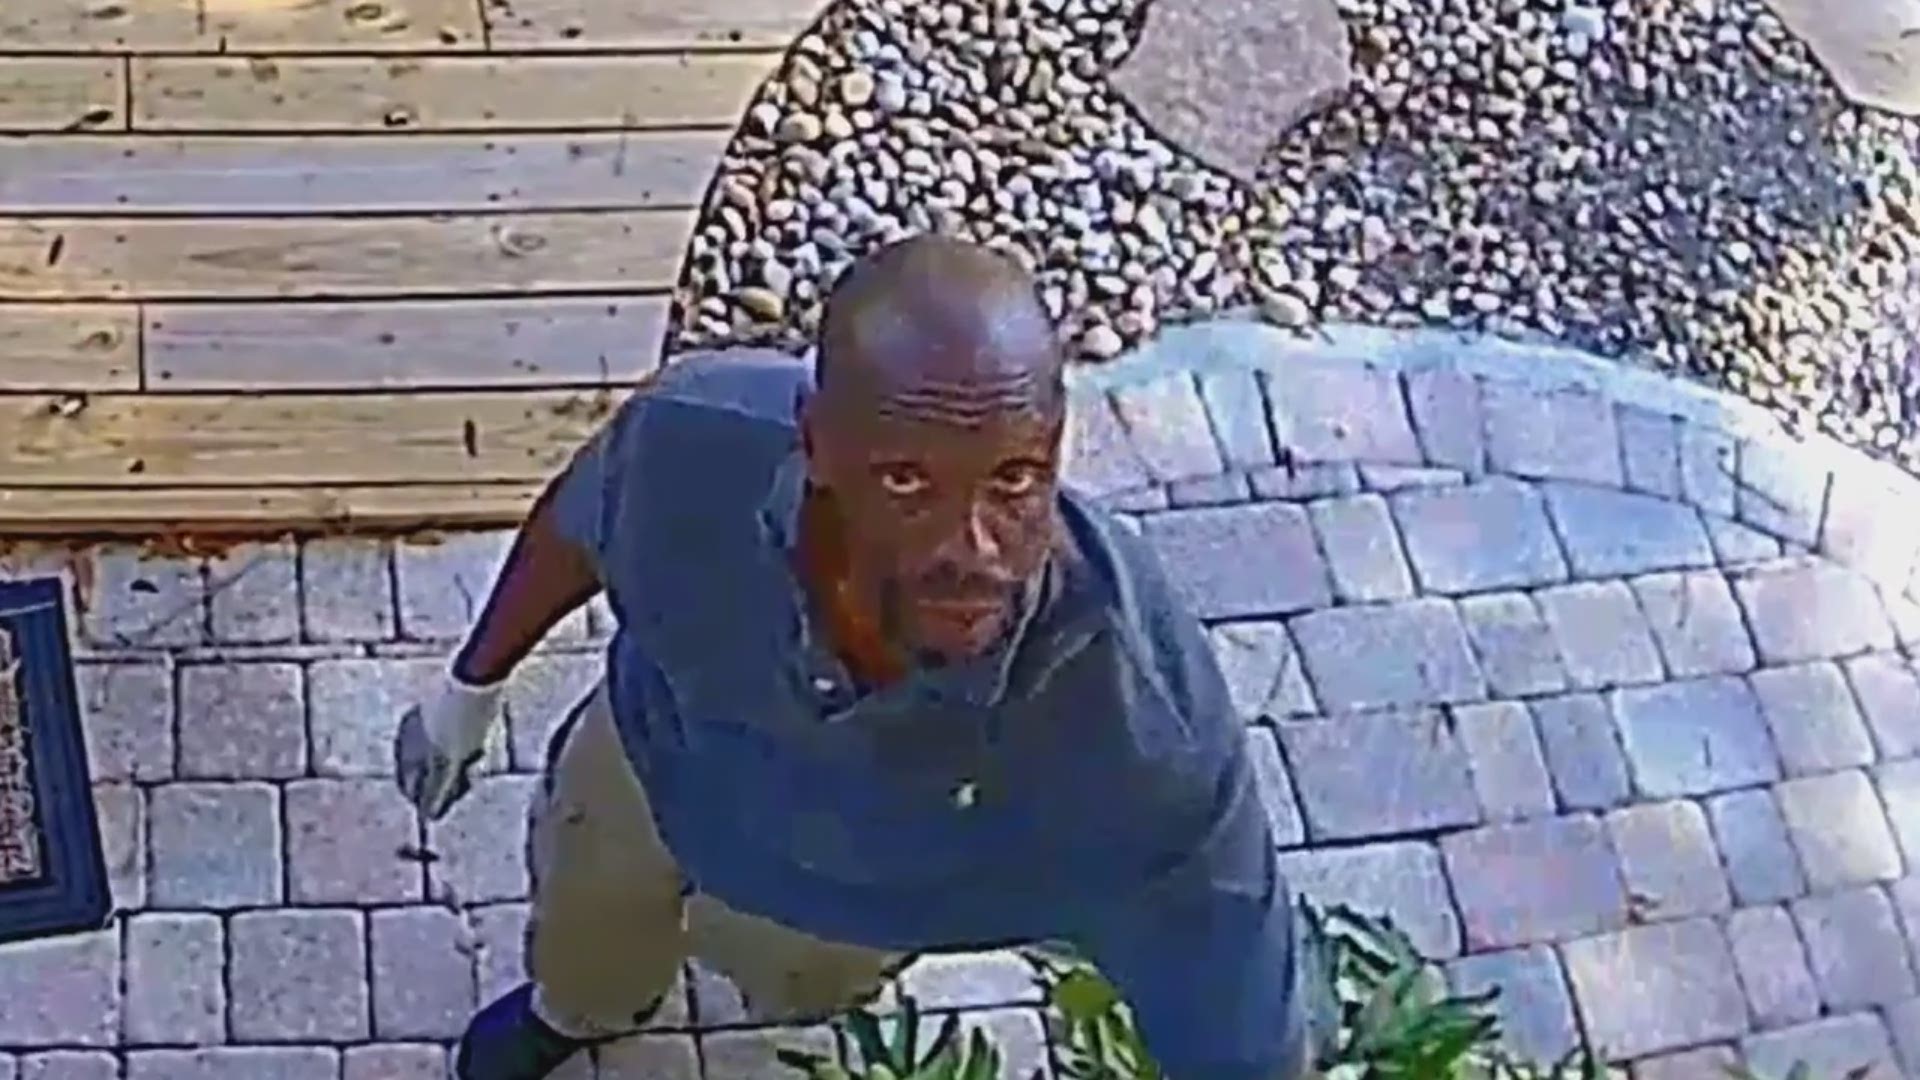 Caught on camera: Police need your help identifying the man seen in this video.